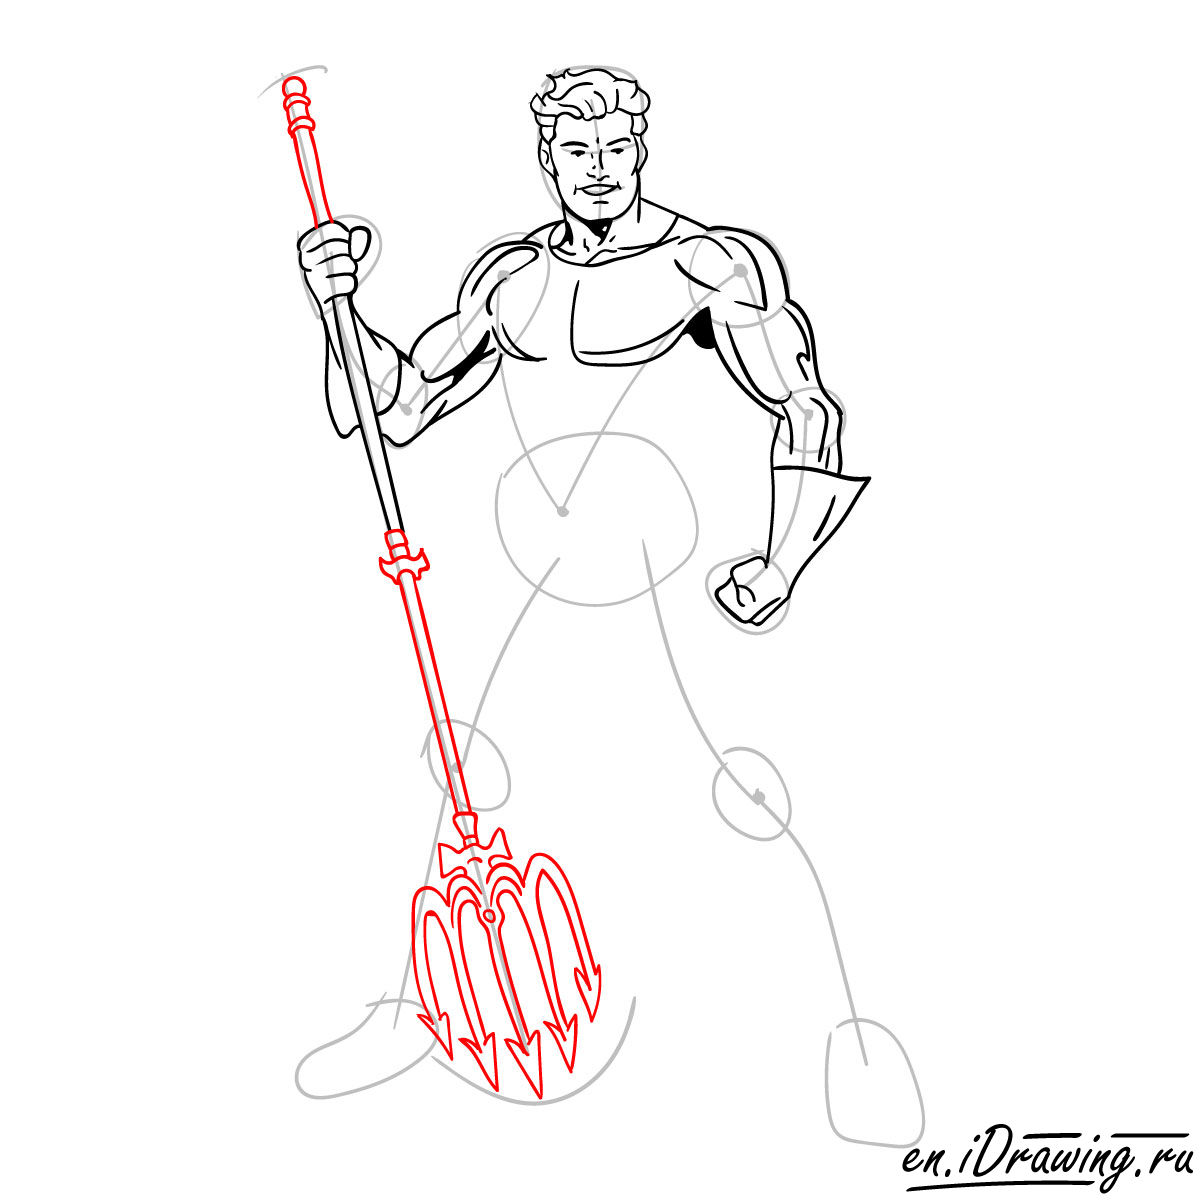 How to draw Aquaman from cartoons and comic books - step 11